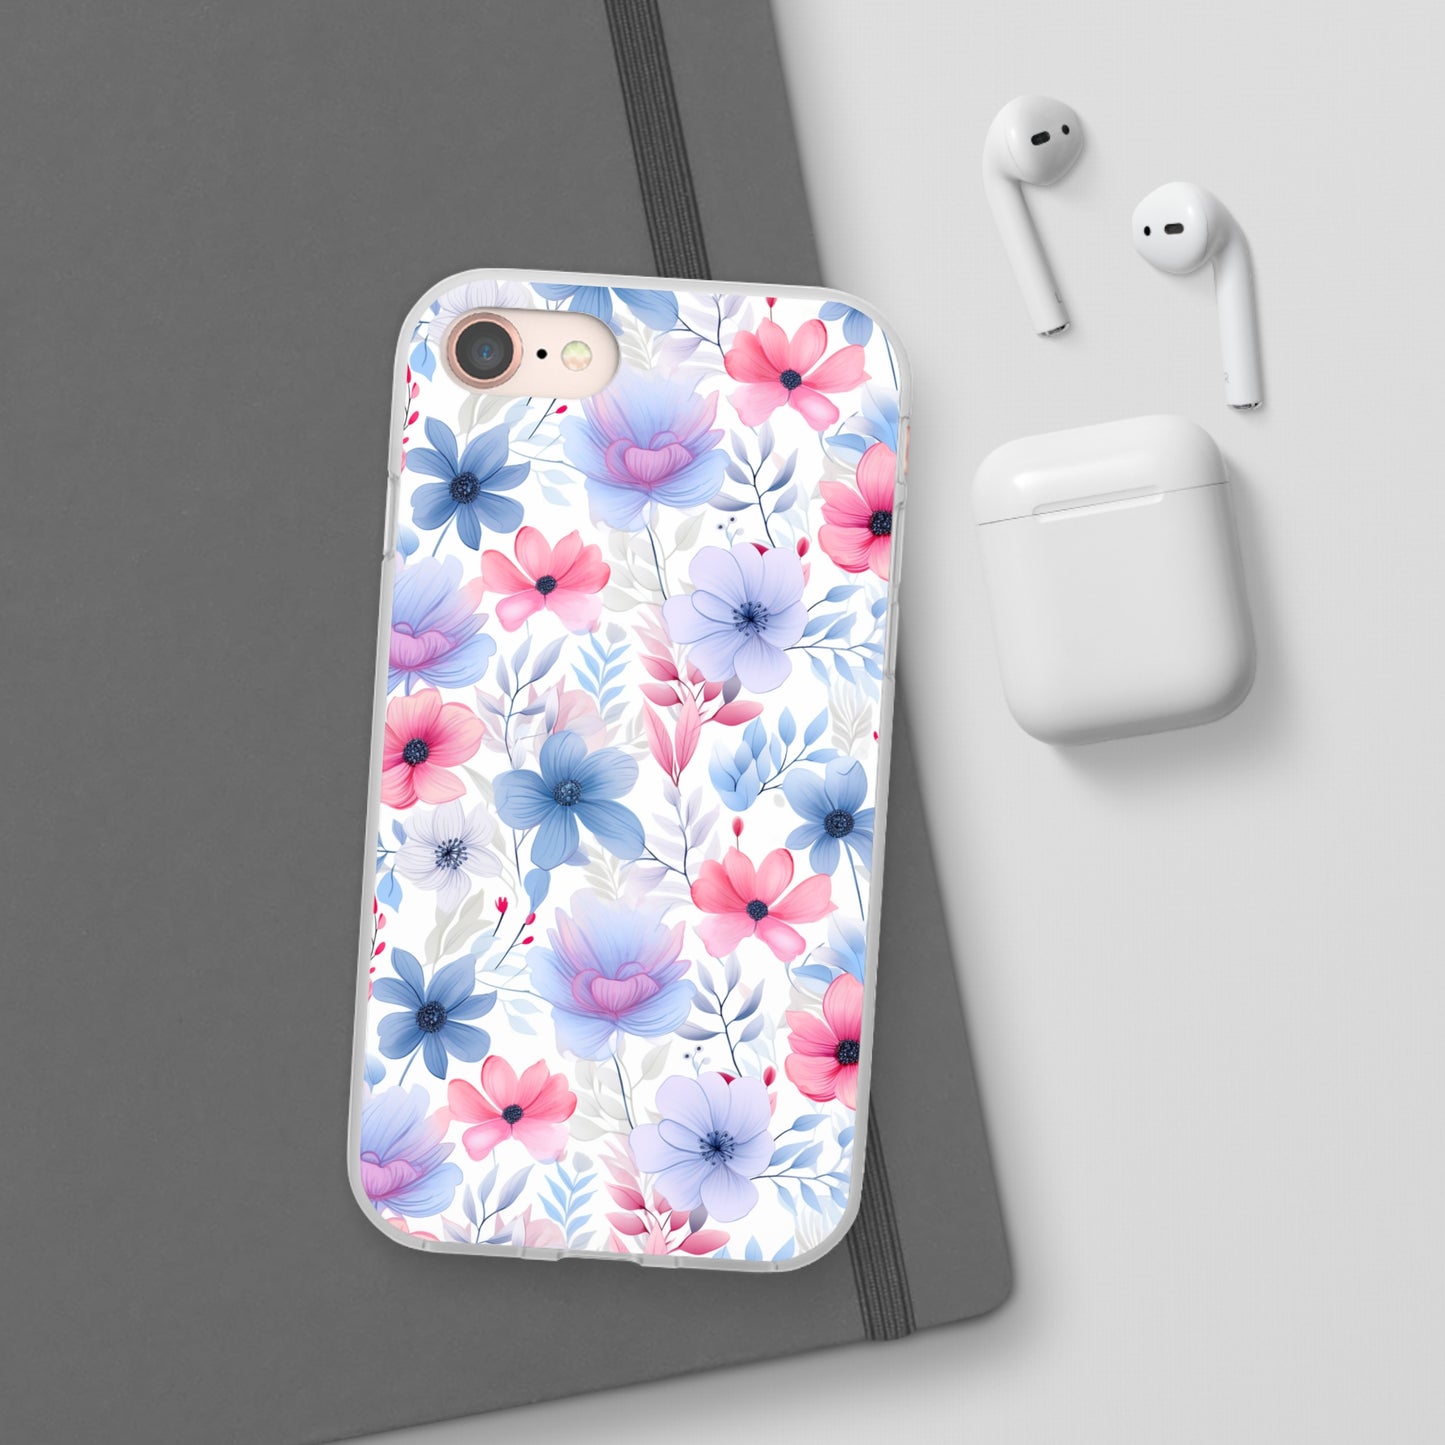 Floral Whispers - Soft Hues of Violets, Pinks, and Blues - Flexi Phone Case Phone Case Pattern Symphony iPhone 8  